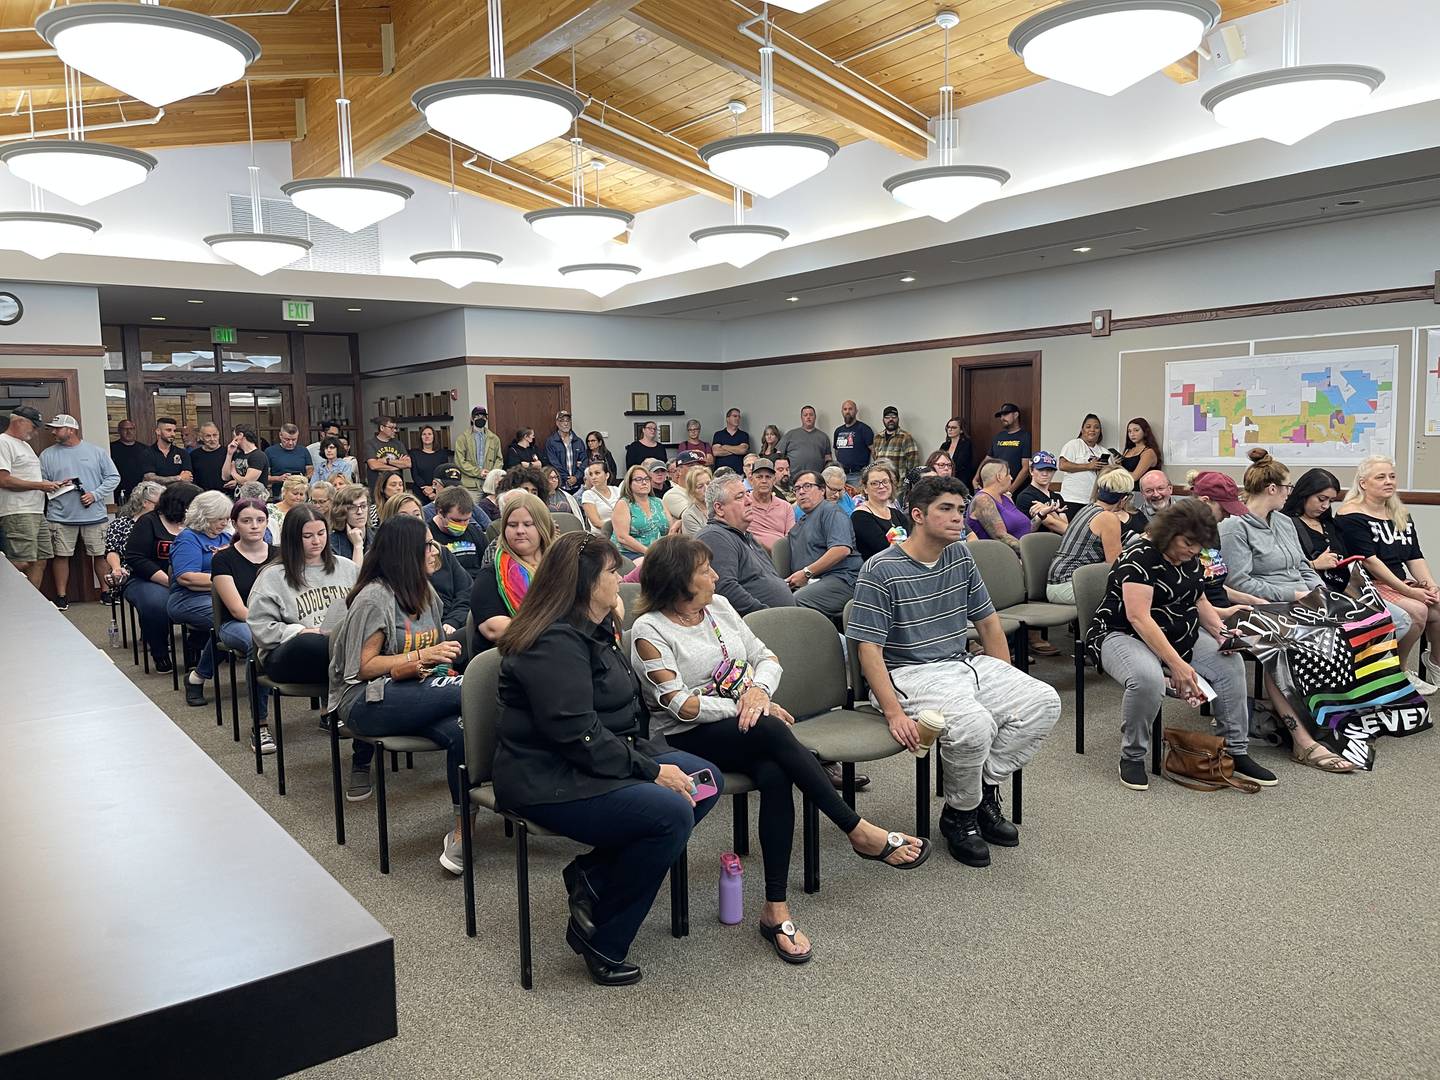 More than 80 people attended the Lake in the Hills' Village Board meeting on Tuesday, Sept. 20, 2022 as a result of the controversy surrounding UpRising Bakery and Cafe.